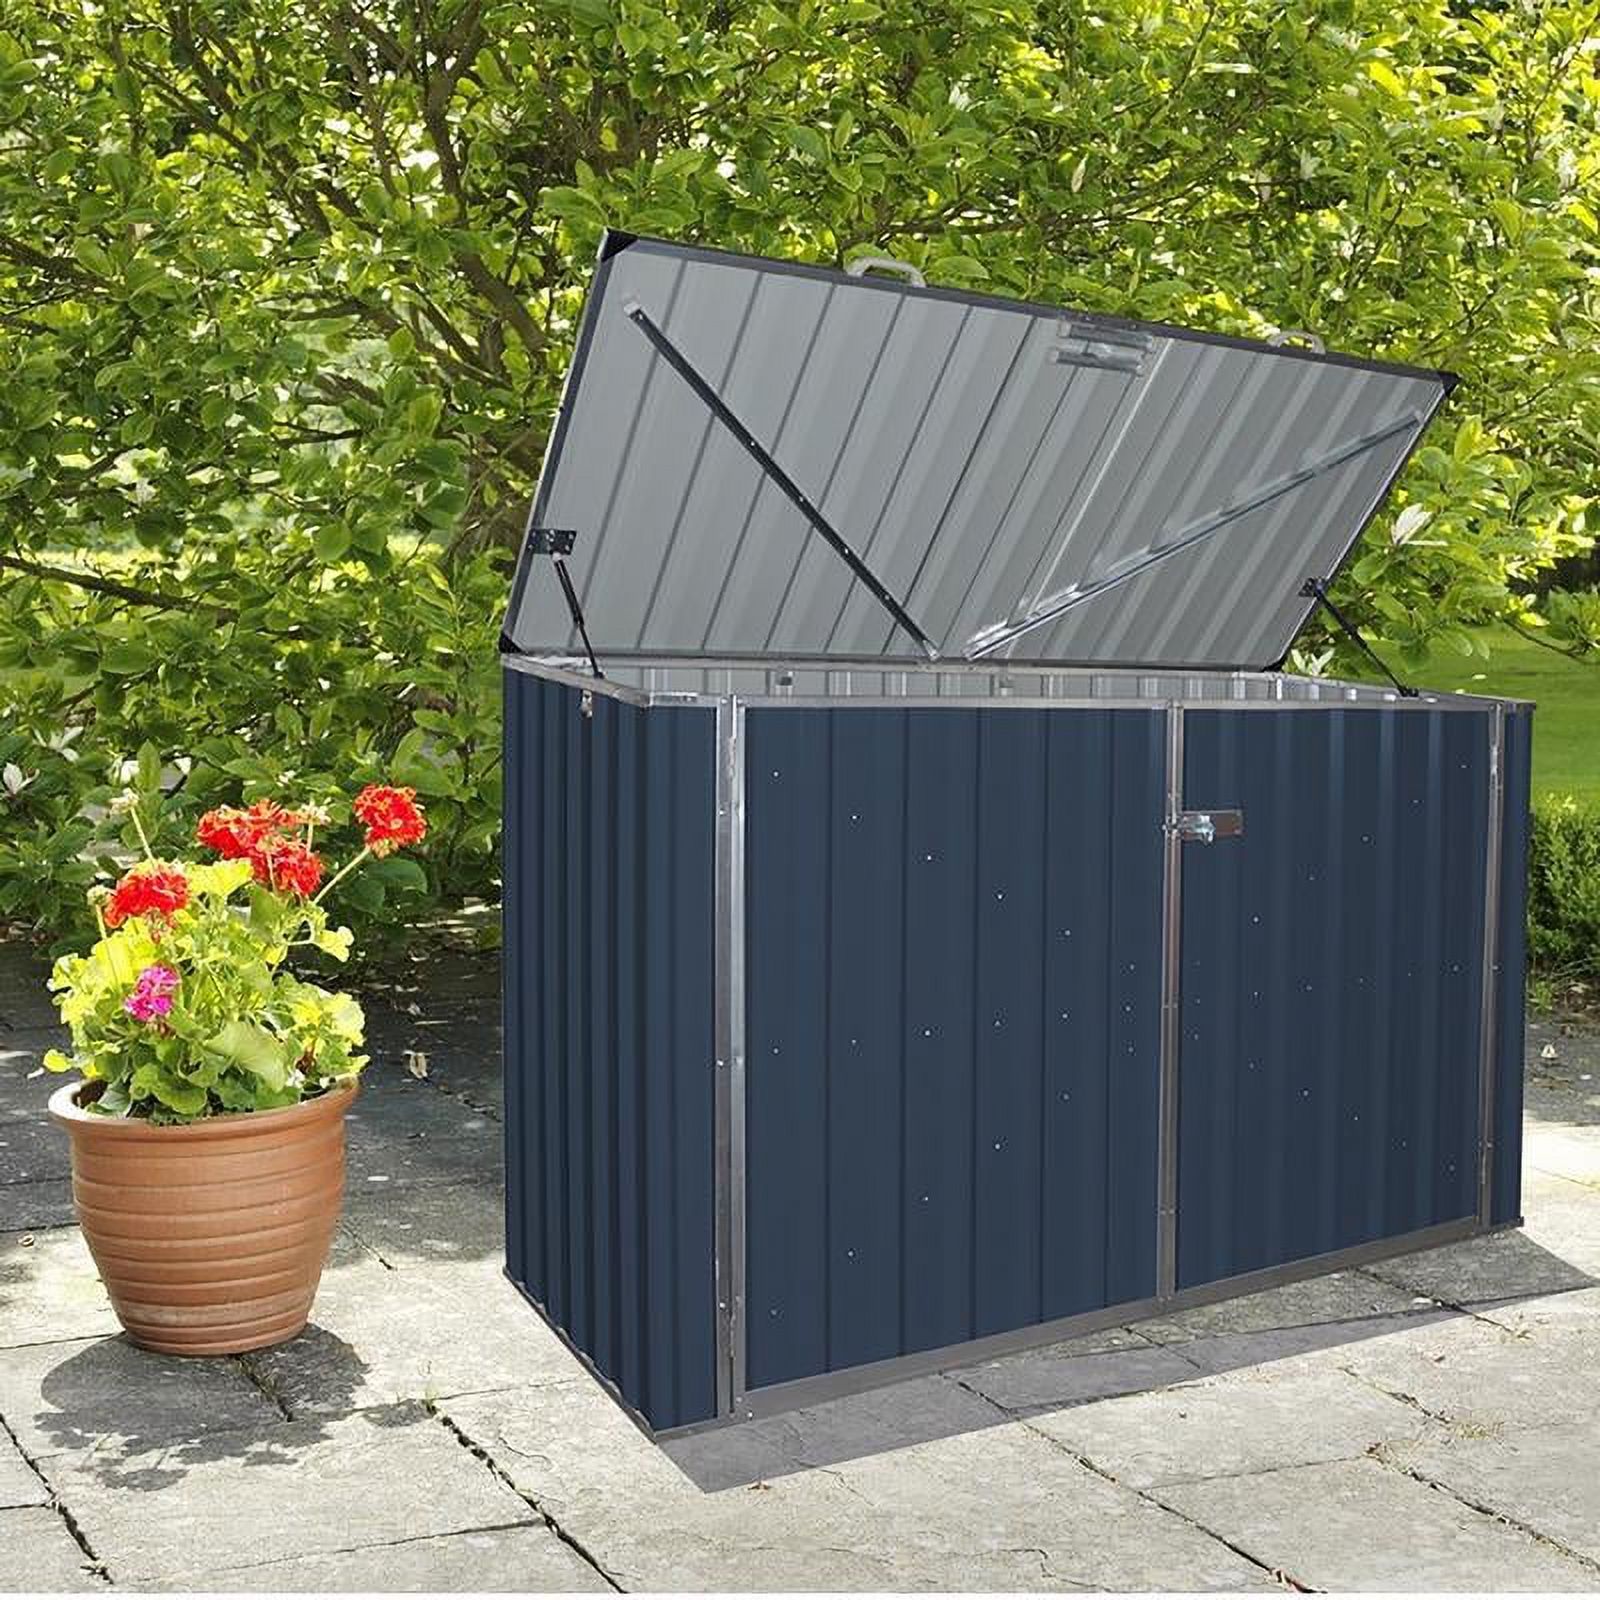 Build-Well 7694235 6 x 3 ft. Metal Horizontal Storage Shed without Floor Kit - image 3 of 3